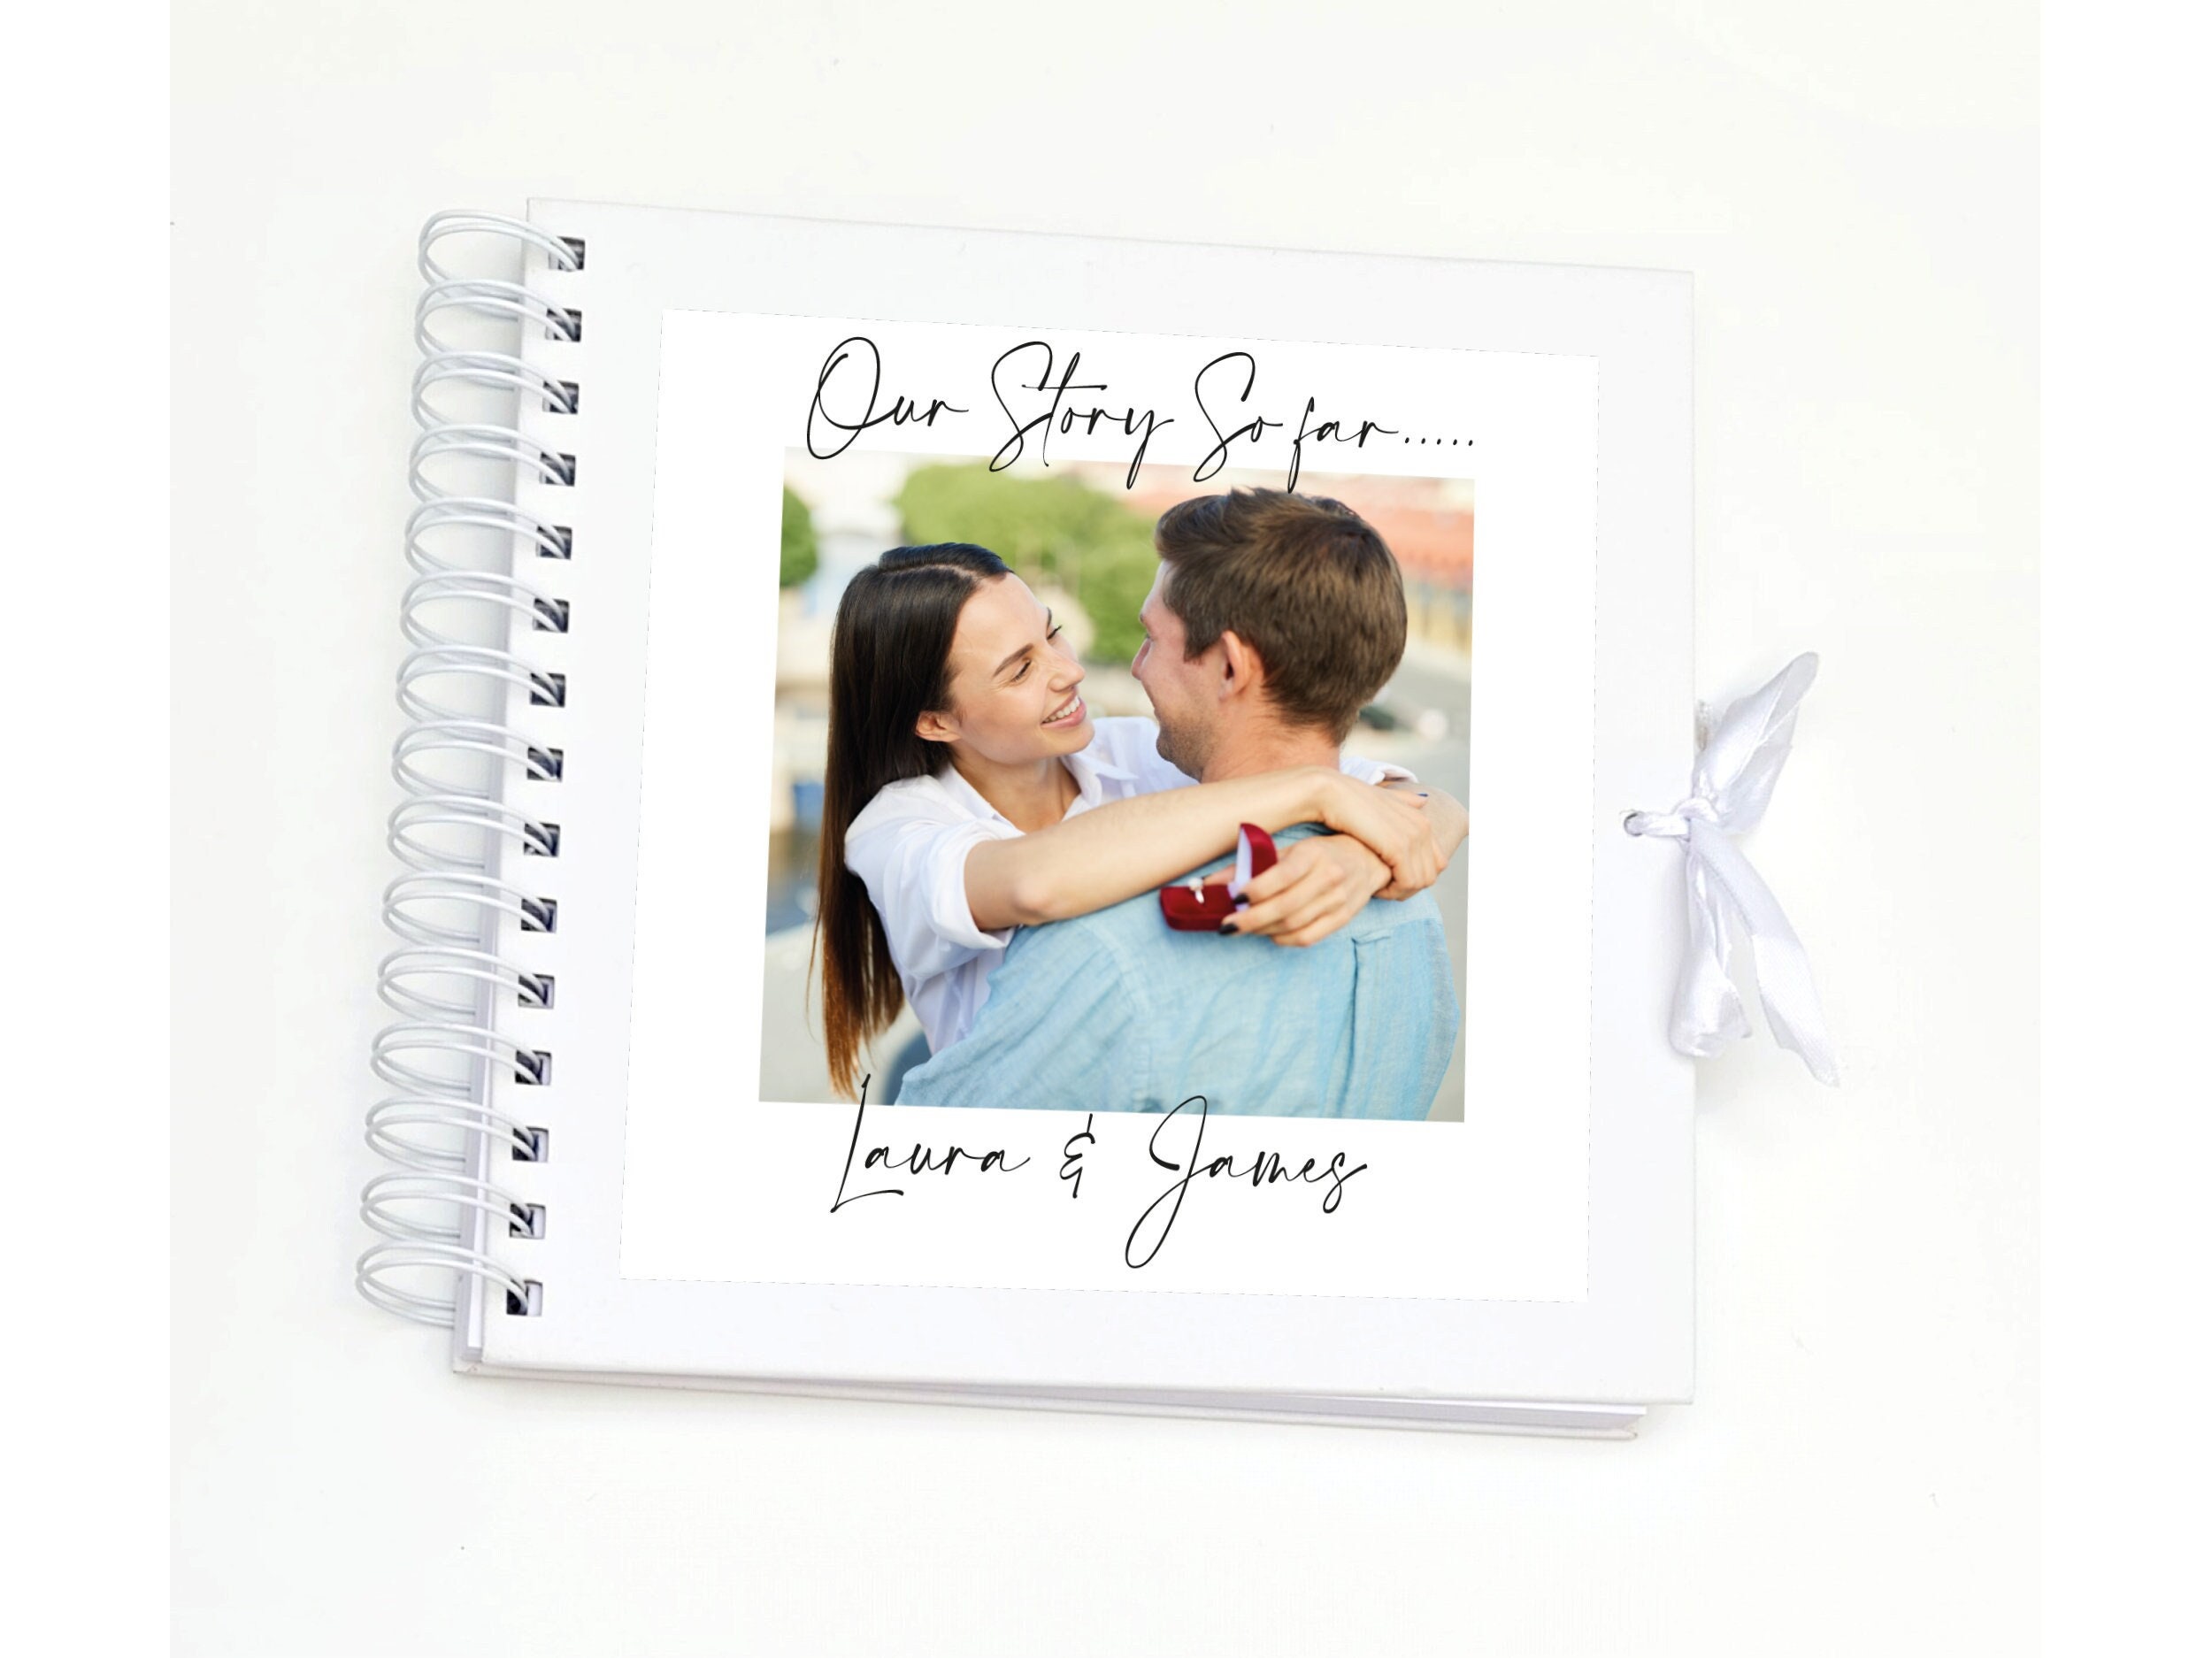  Modern Notebooks Story of Us Embossed Scrapbook Album for  Couples - Rose Gold Foil, 8.5 x 8.5 in